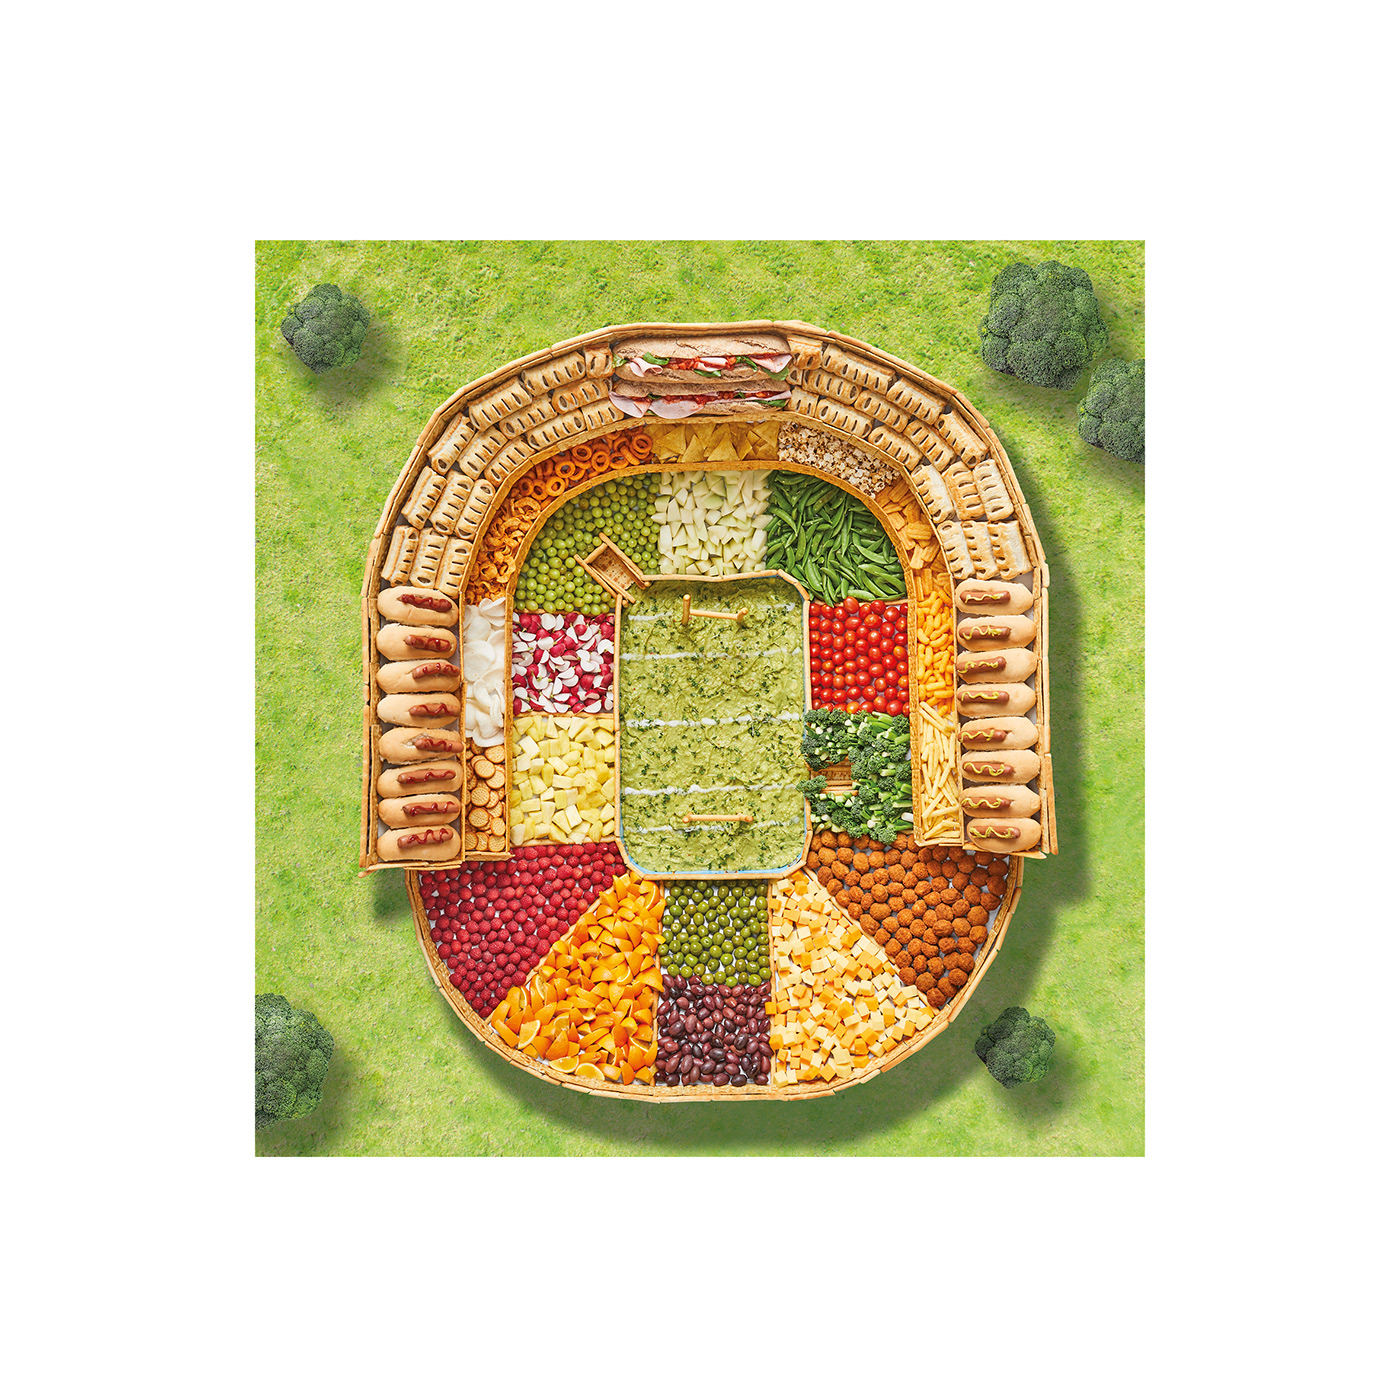 A Rugby Stadium constructed out of food